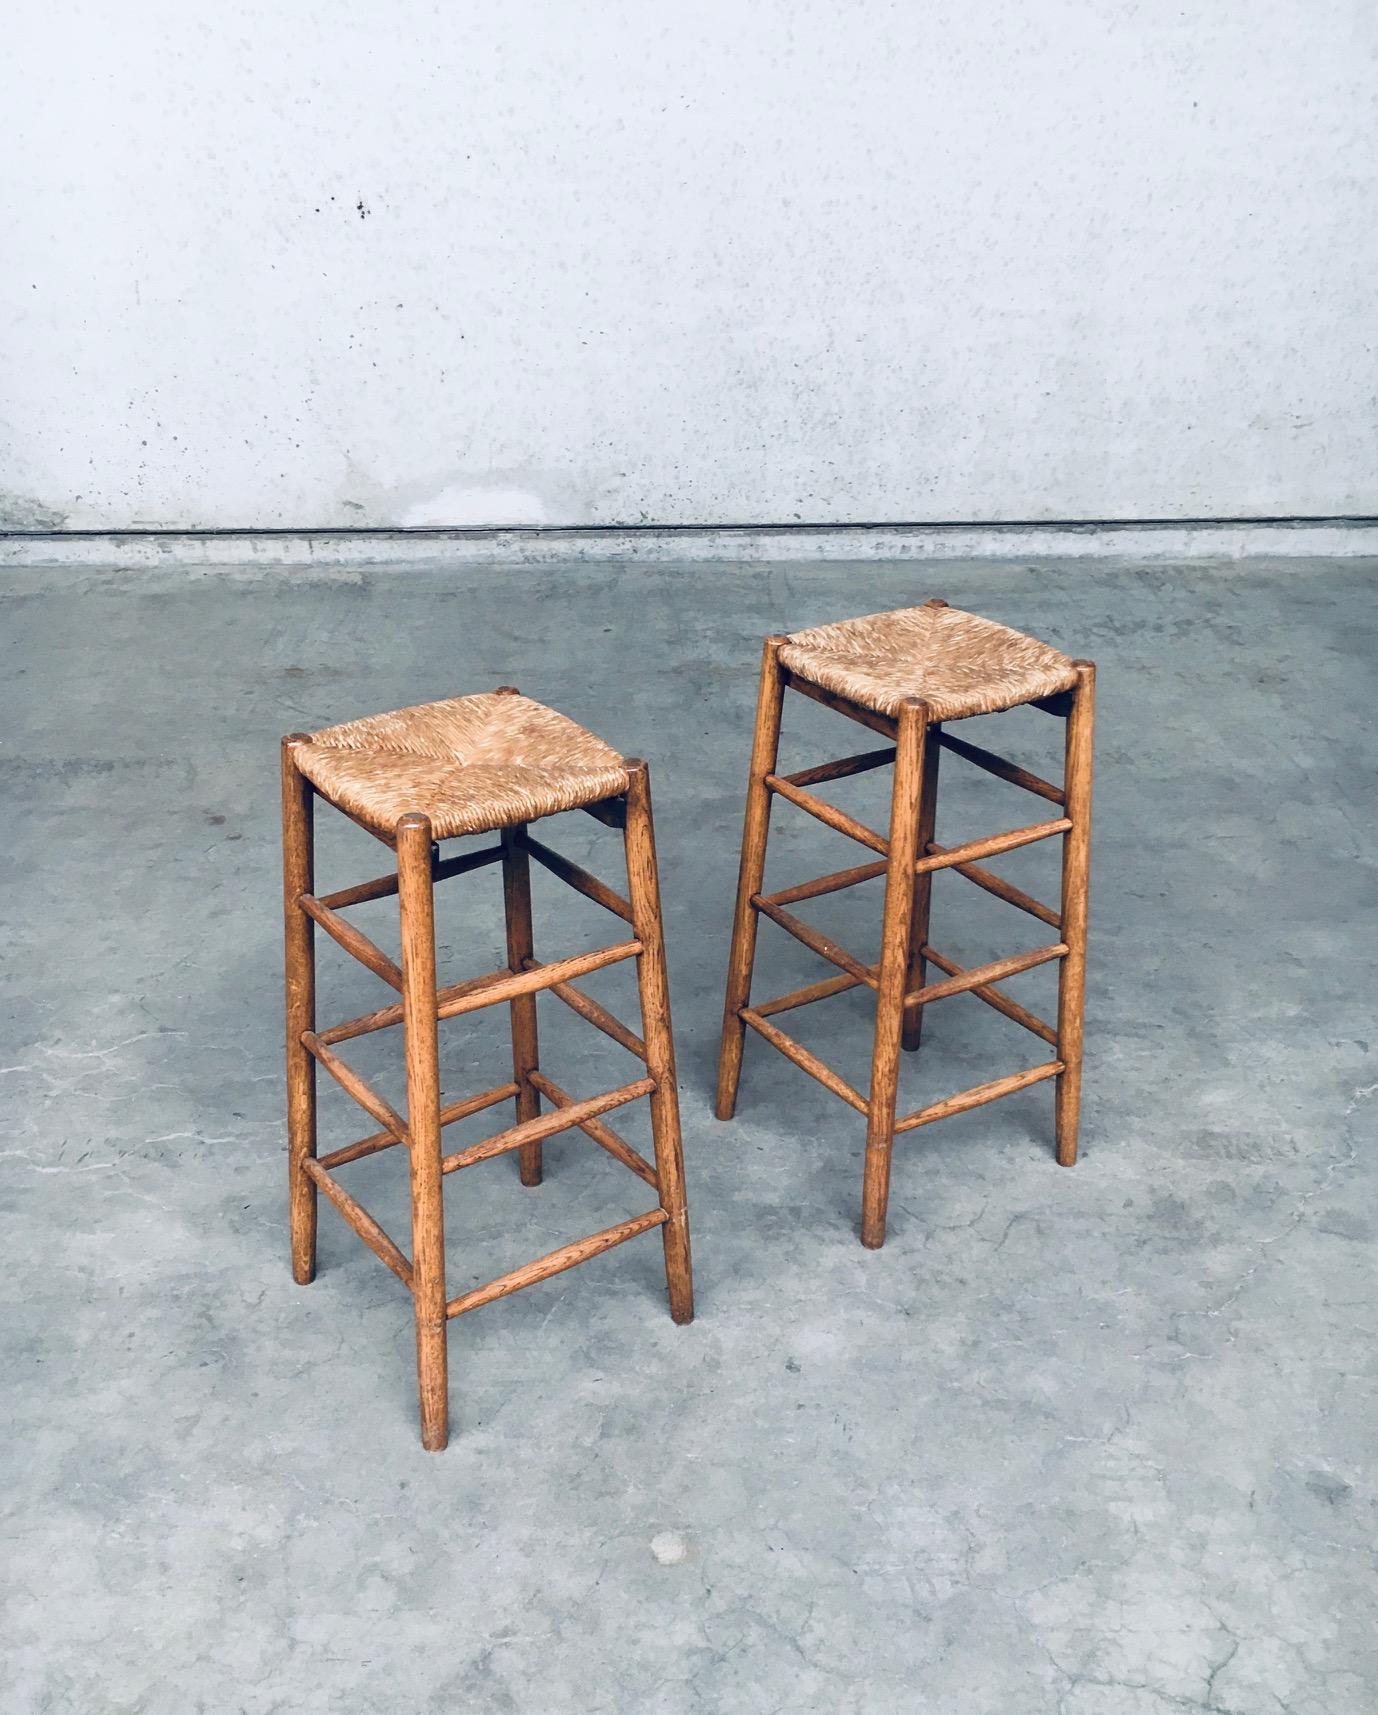 Vintage Mid-Century French Rustic made Bar Stool set in the style of Charlotte Perriand. Made in France, 1950's / 1960's period. Solid oak constructed frame with rush woven seat. Nice tapering in the design with a light color varnish. Both are in